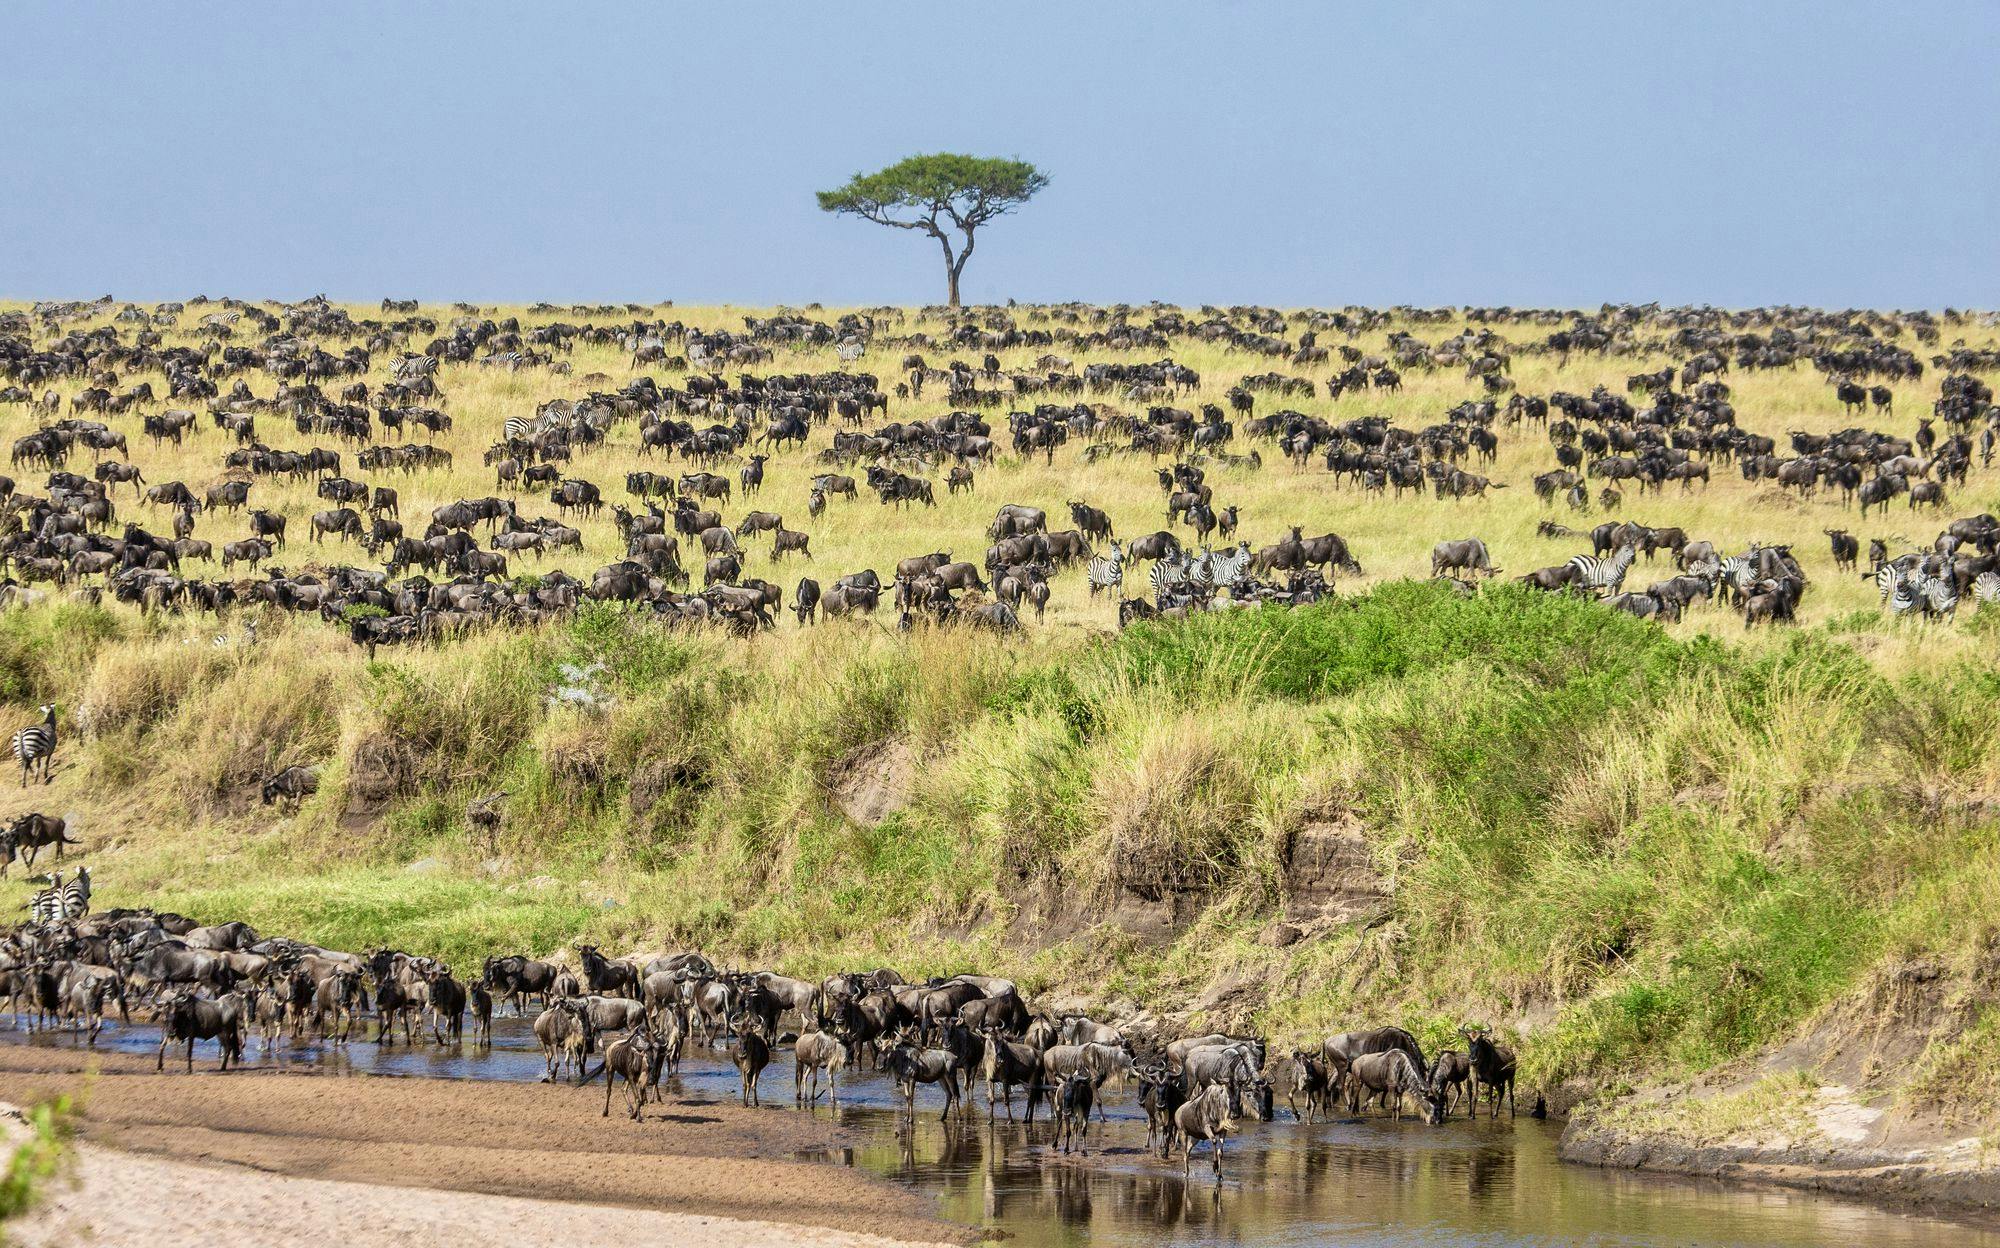 The Journey of the Wildebeests in Serengeti National Park